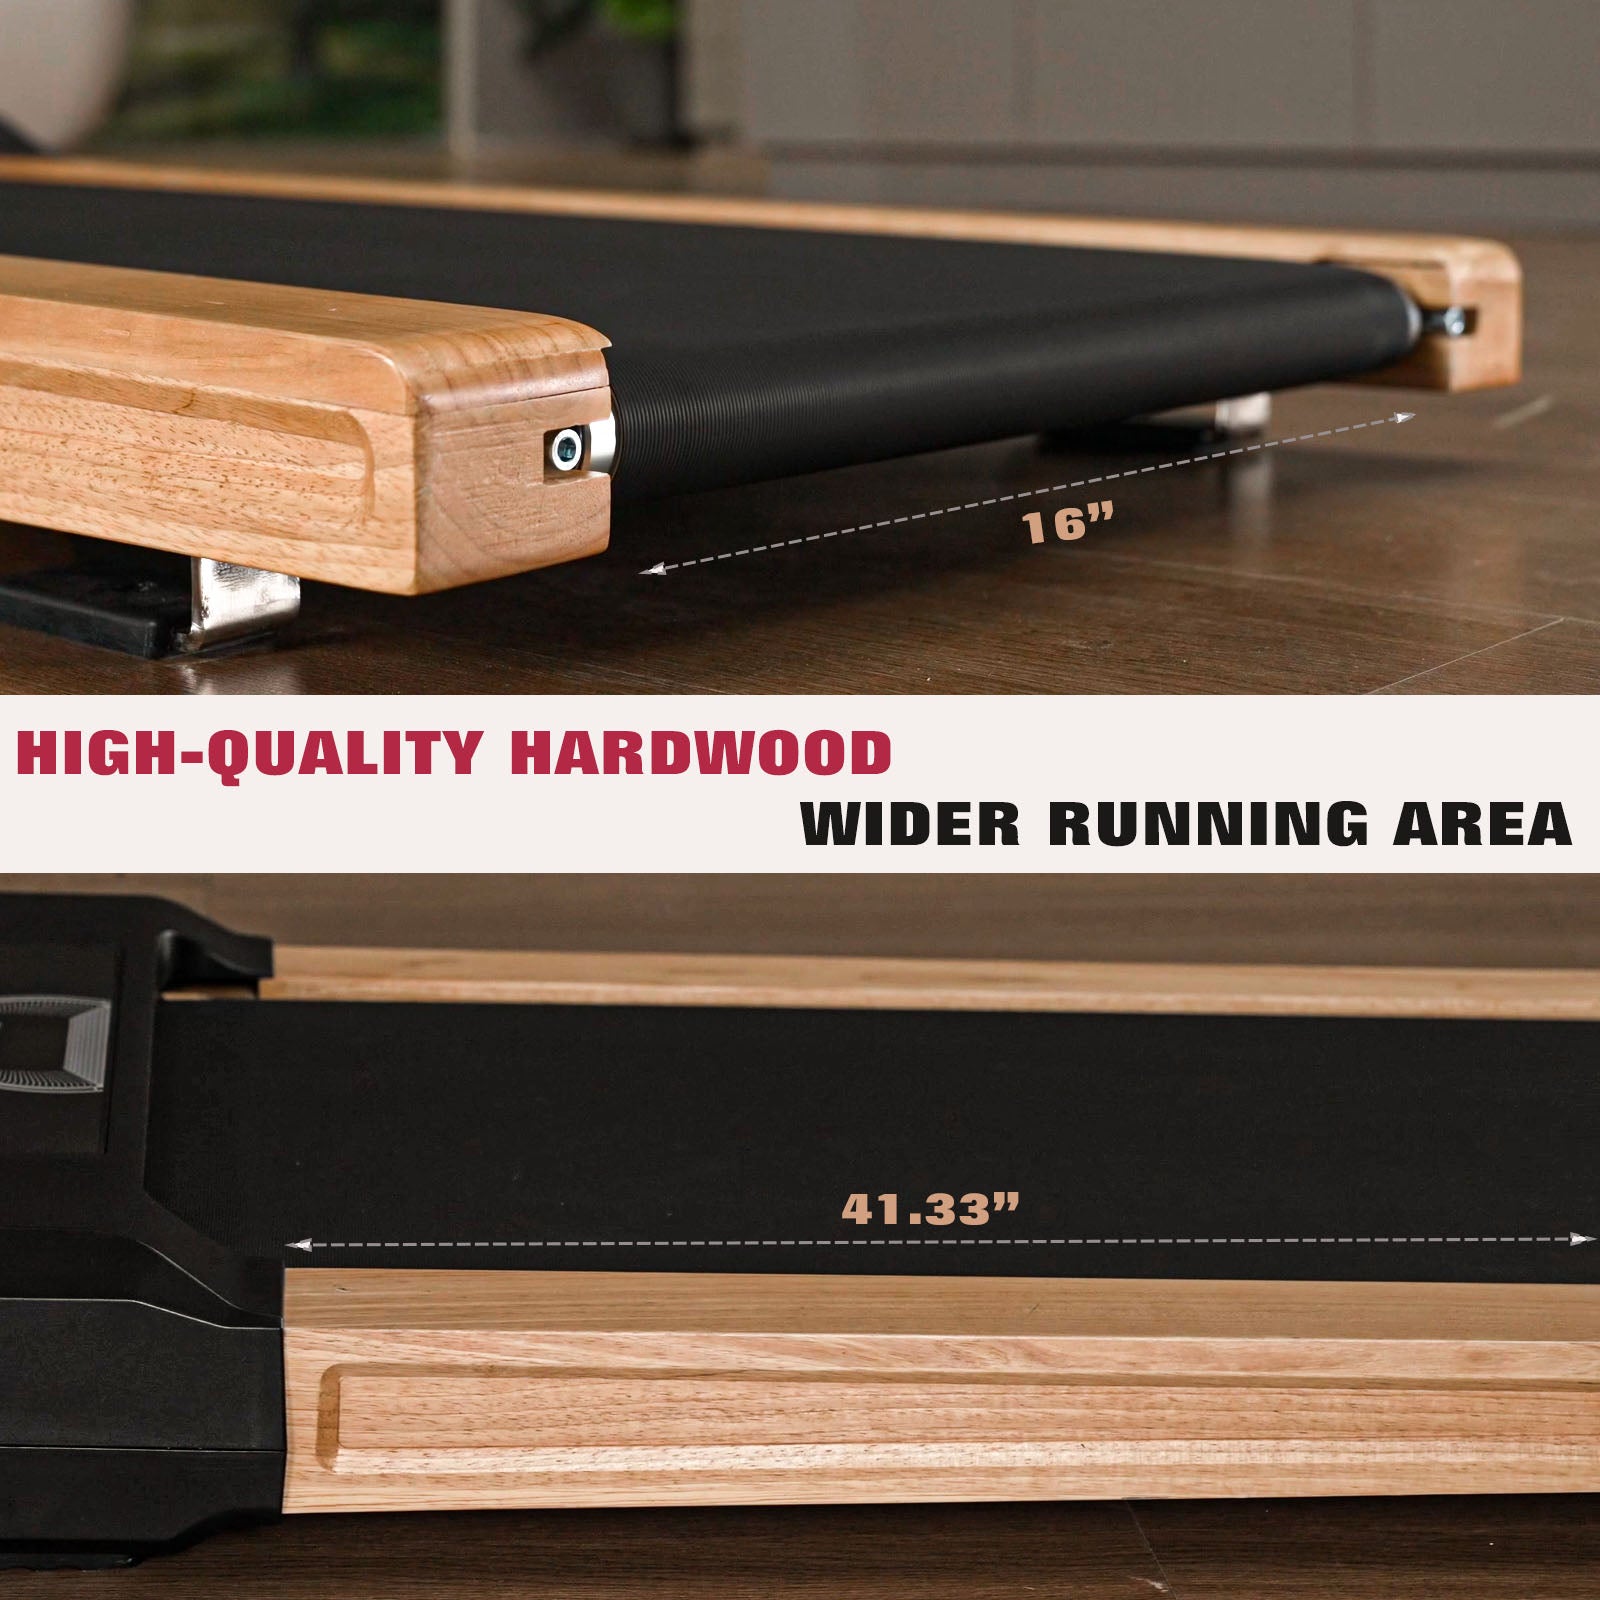 FLIMDER Walking Pad, Under Desk Treadmill with High Sound Quality Speaker, Exquisite Wood Treadmills for Home Small, Max 300LBS Capacity, Installation-Free with LED Light Strap Display